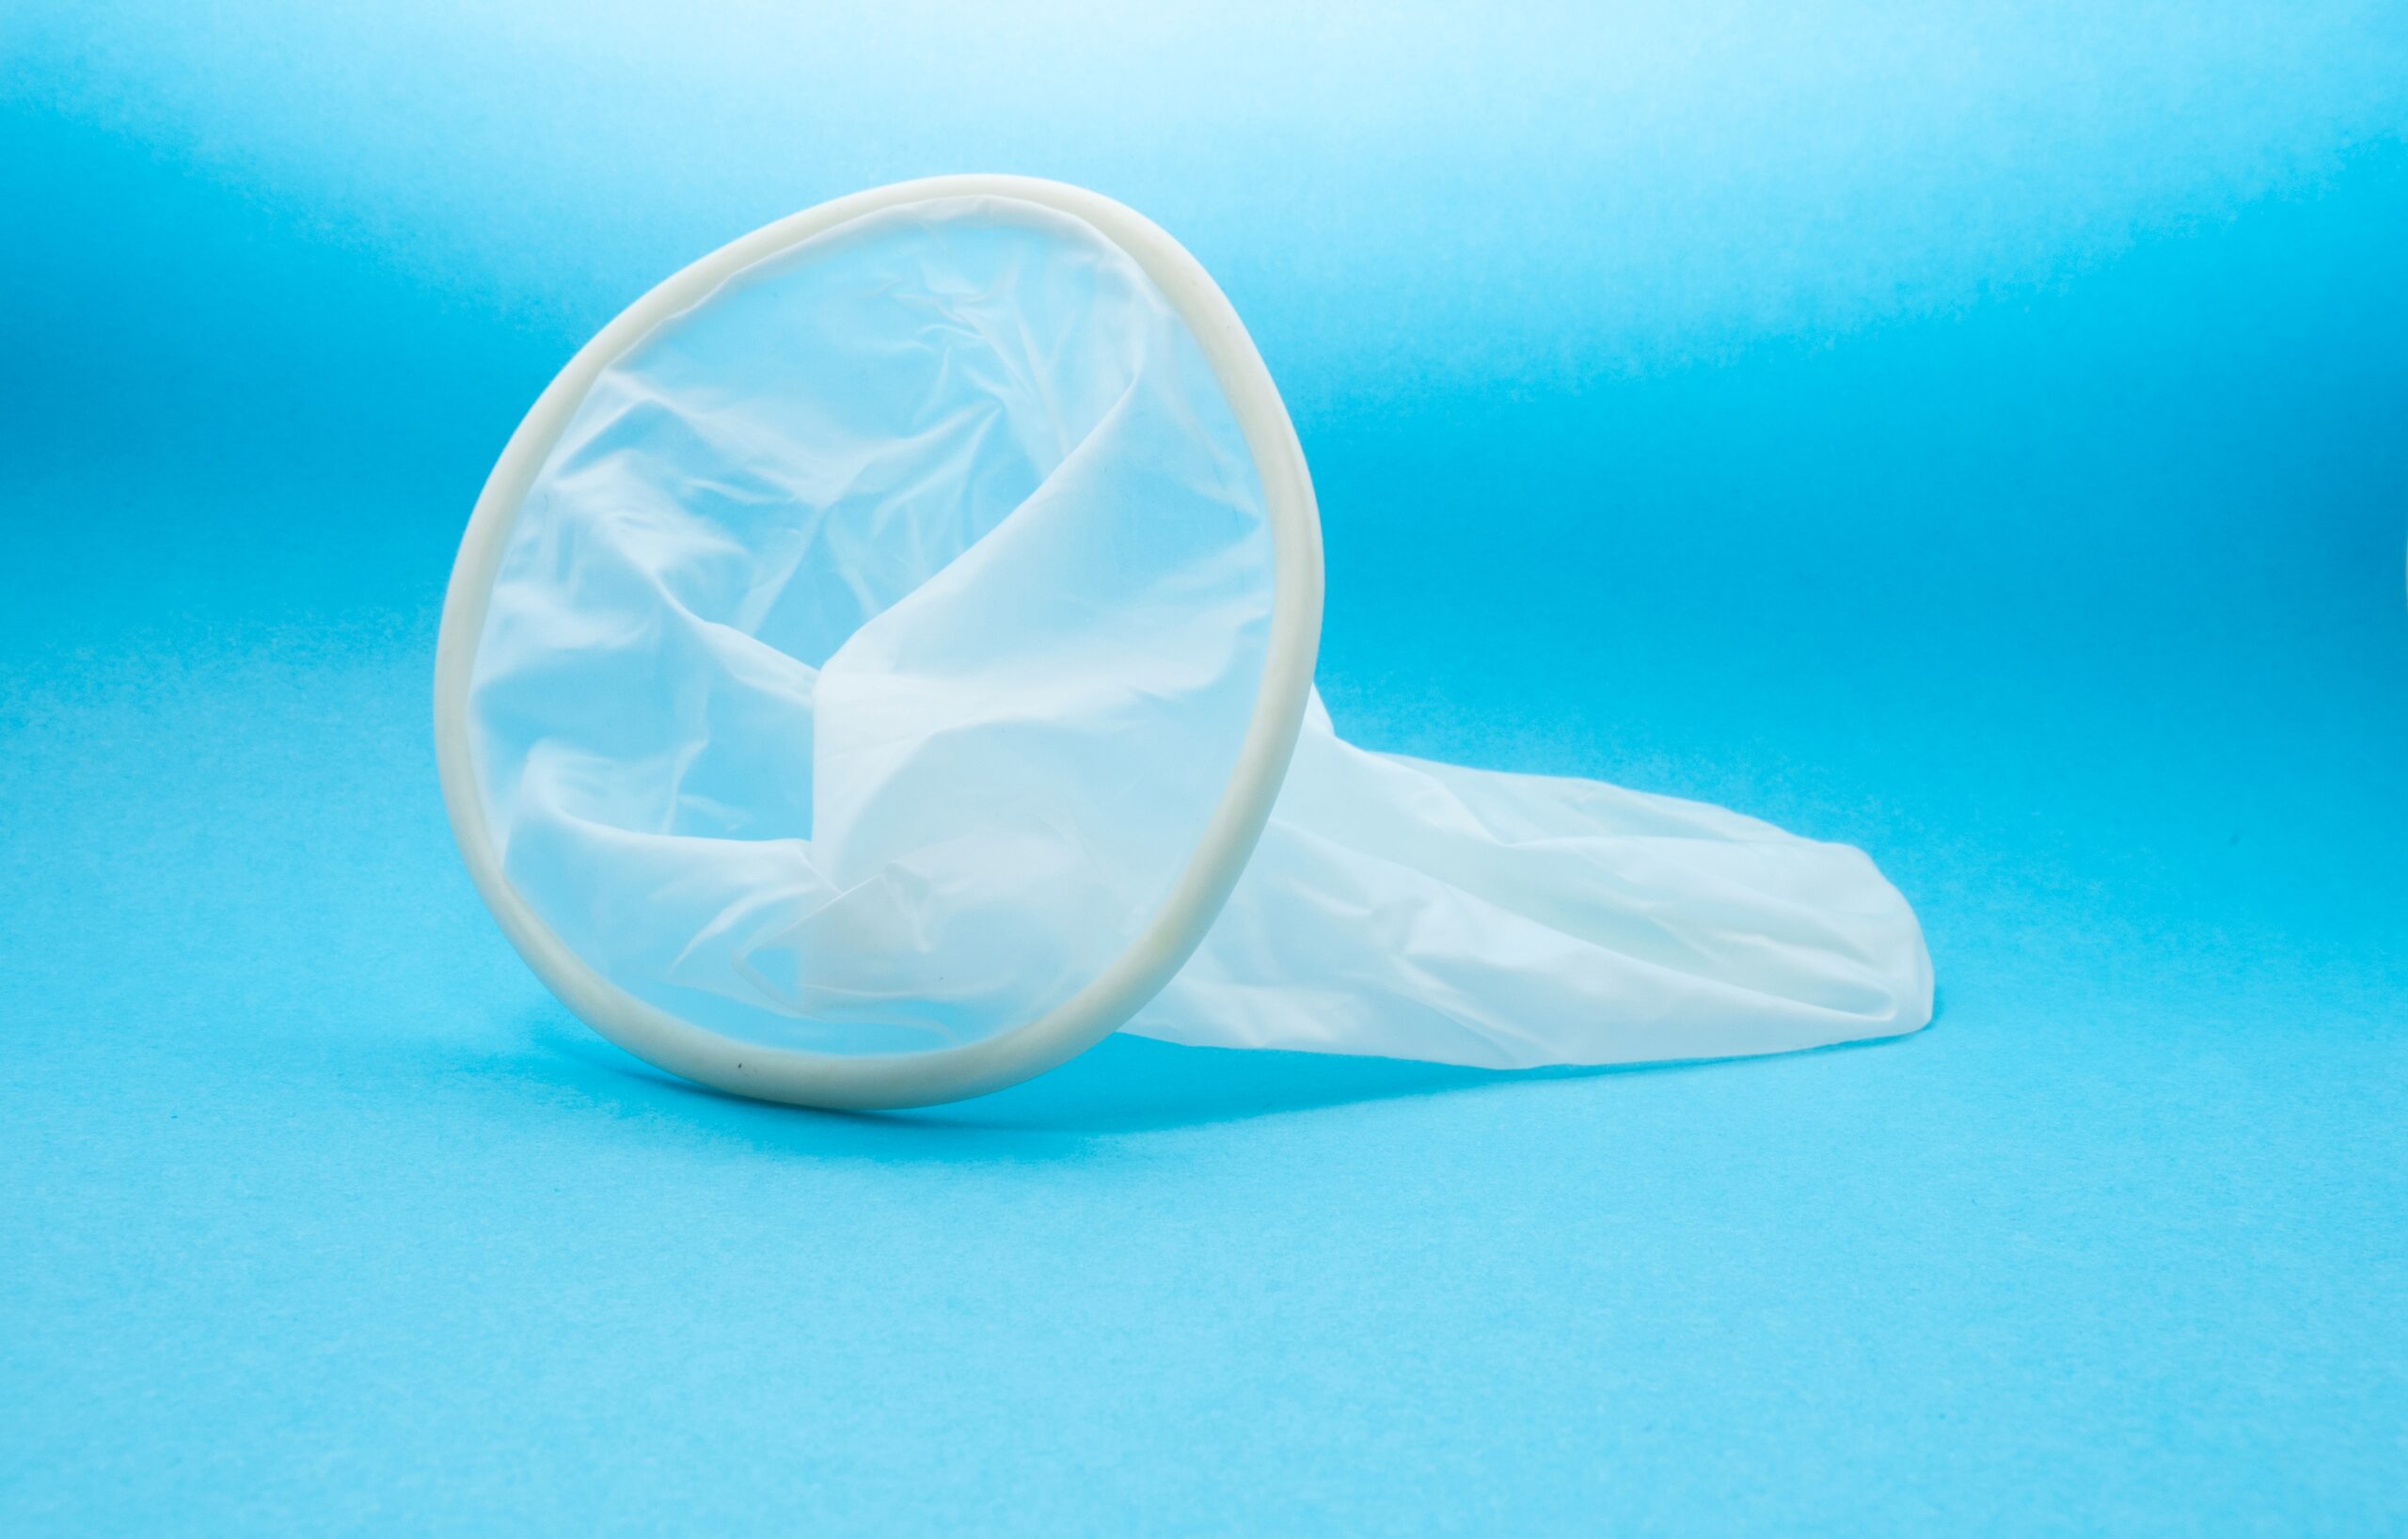 A female condom, which has two clear rings connected by clear plastic